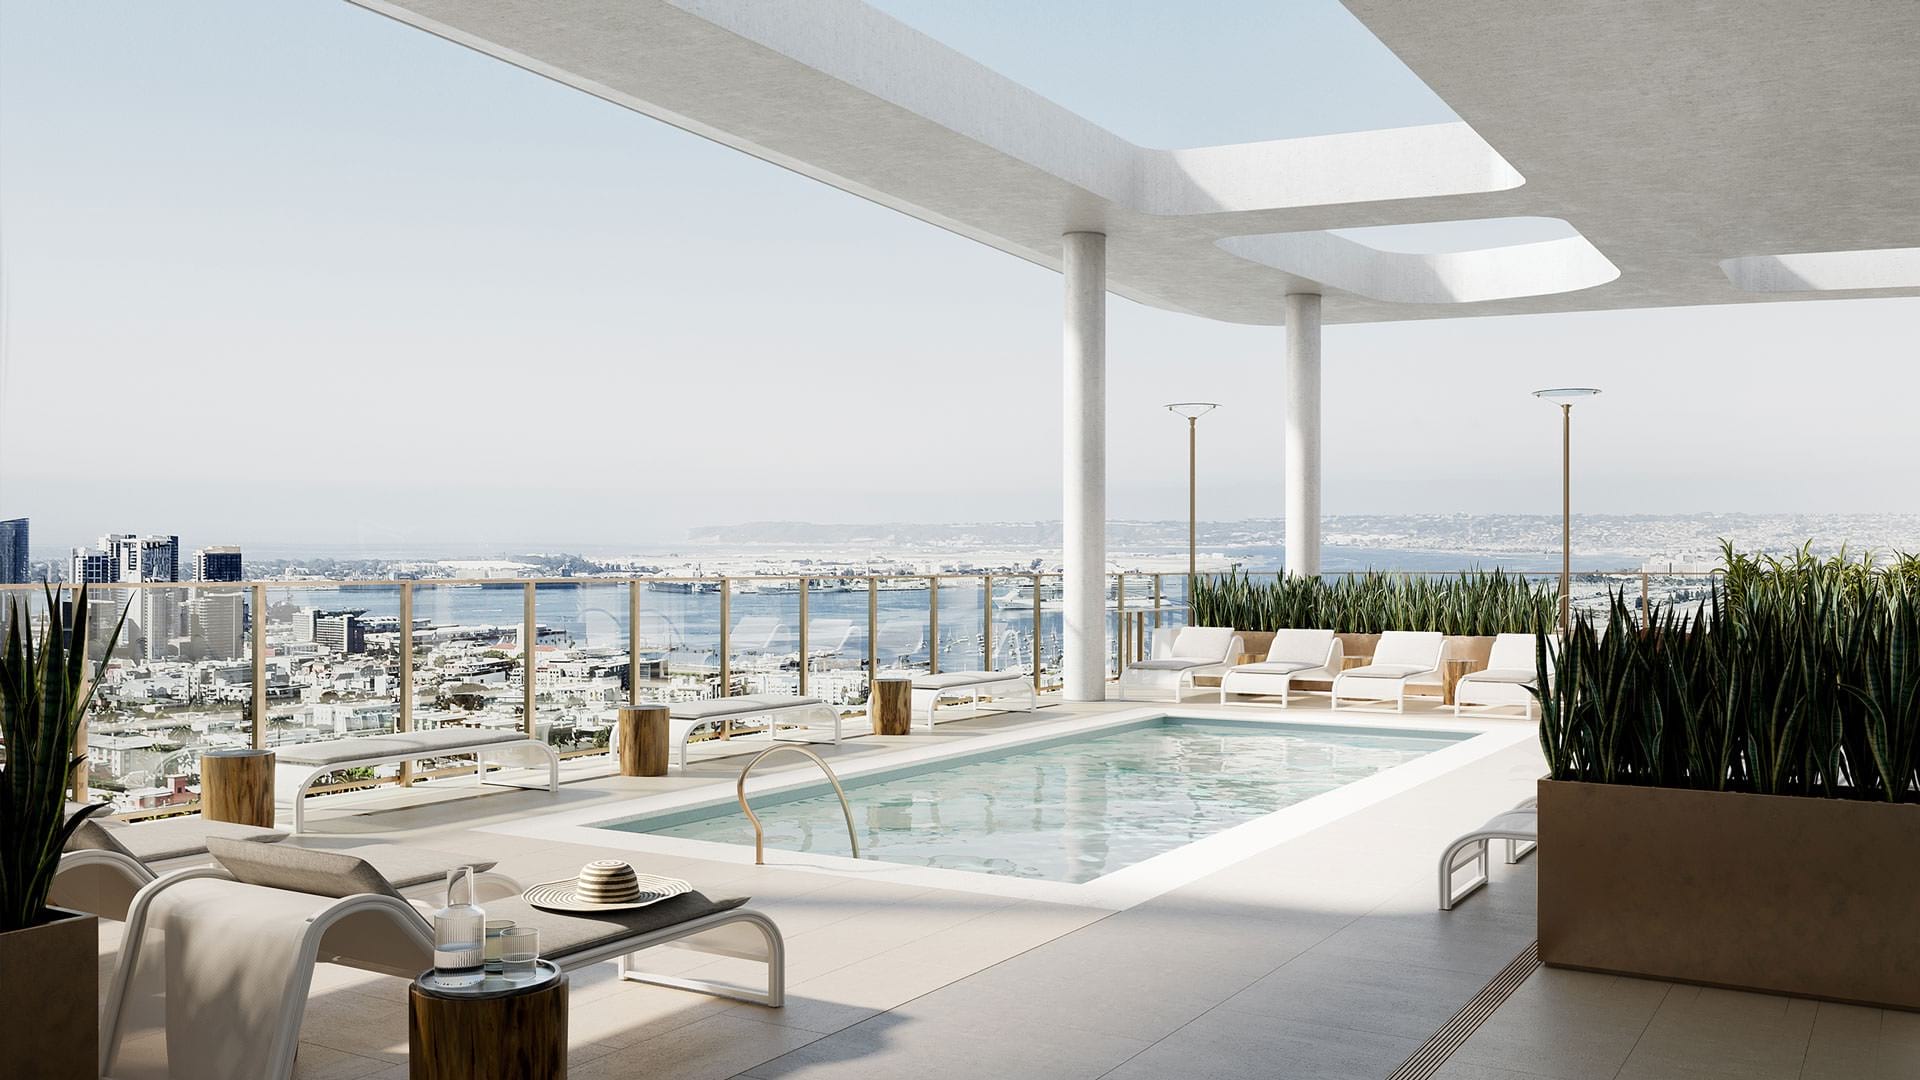 Large sparkling pool with sundecks located on the roof top